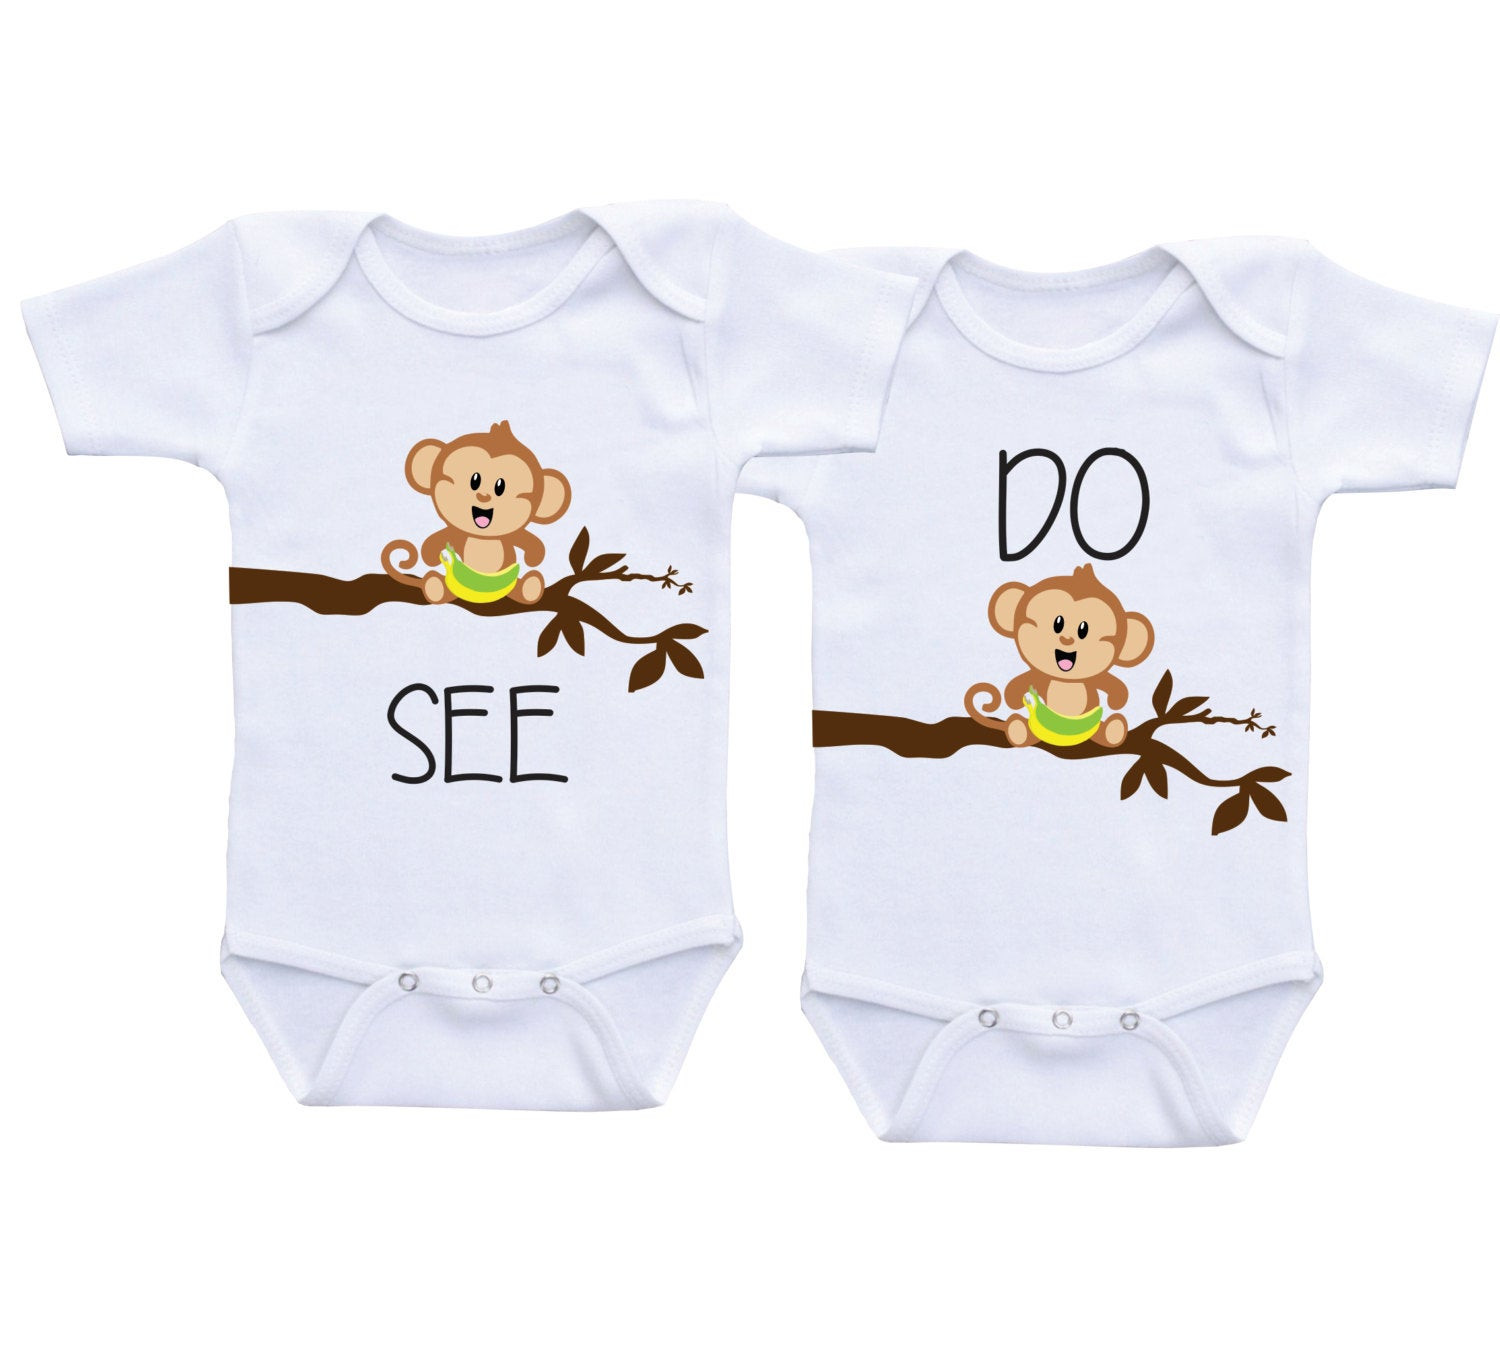 Baby Girl Twins Gifts
 Matching Twin esies Twin baby ts for baby girl baby boy